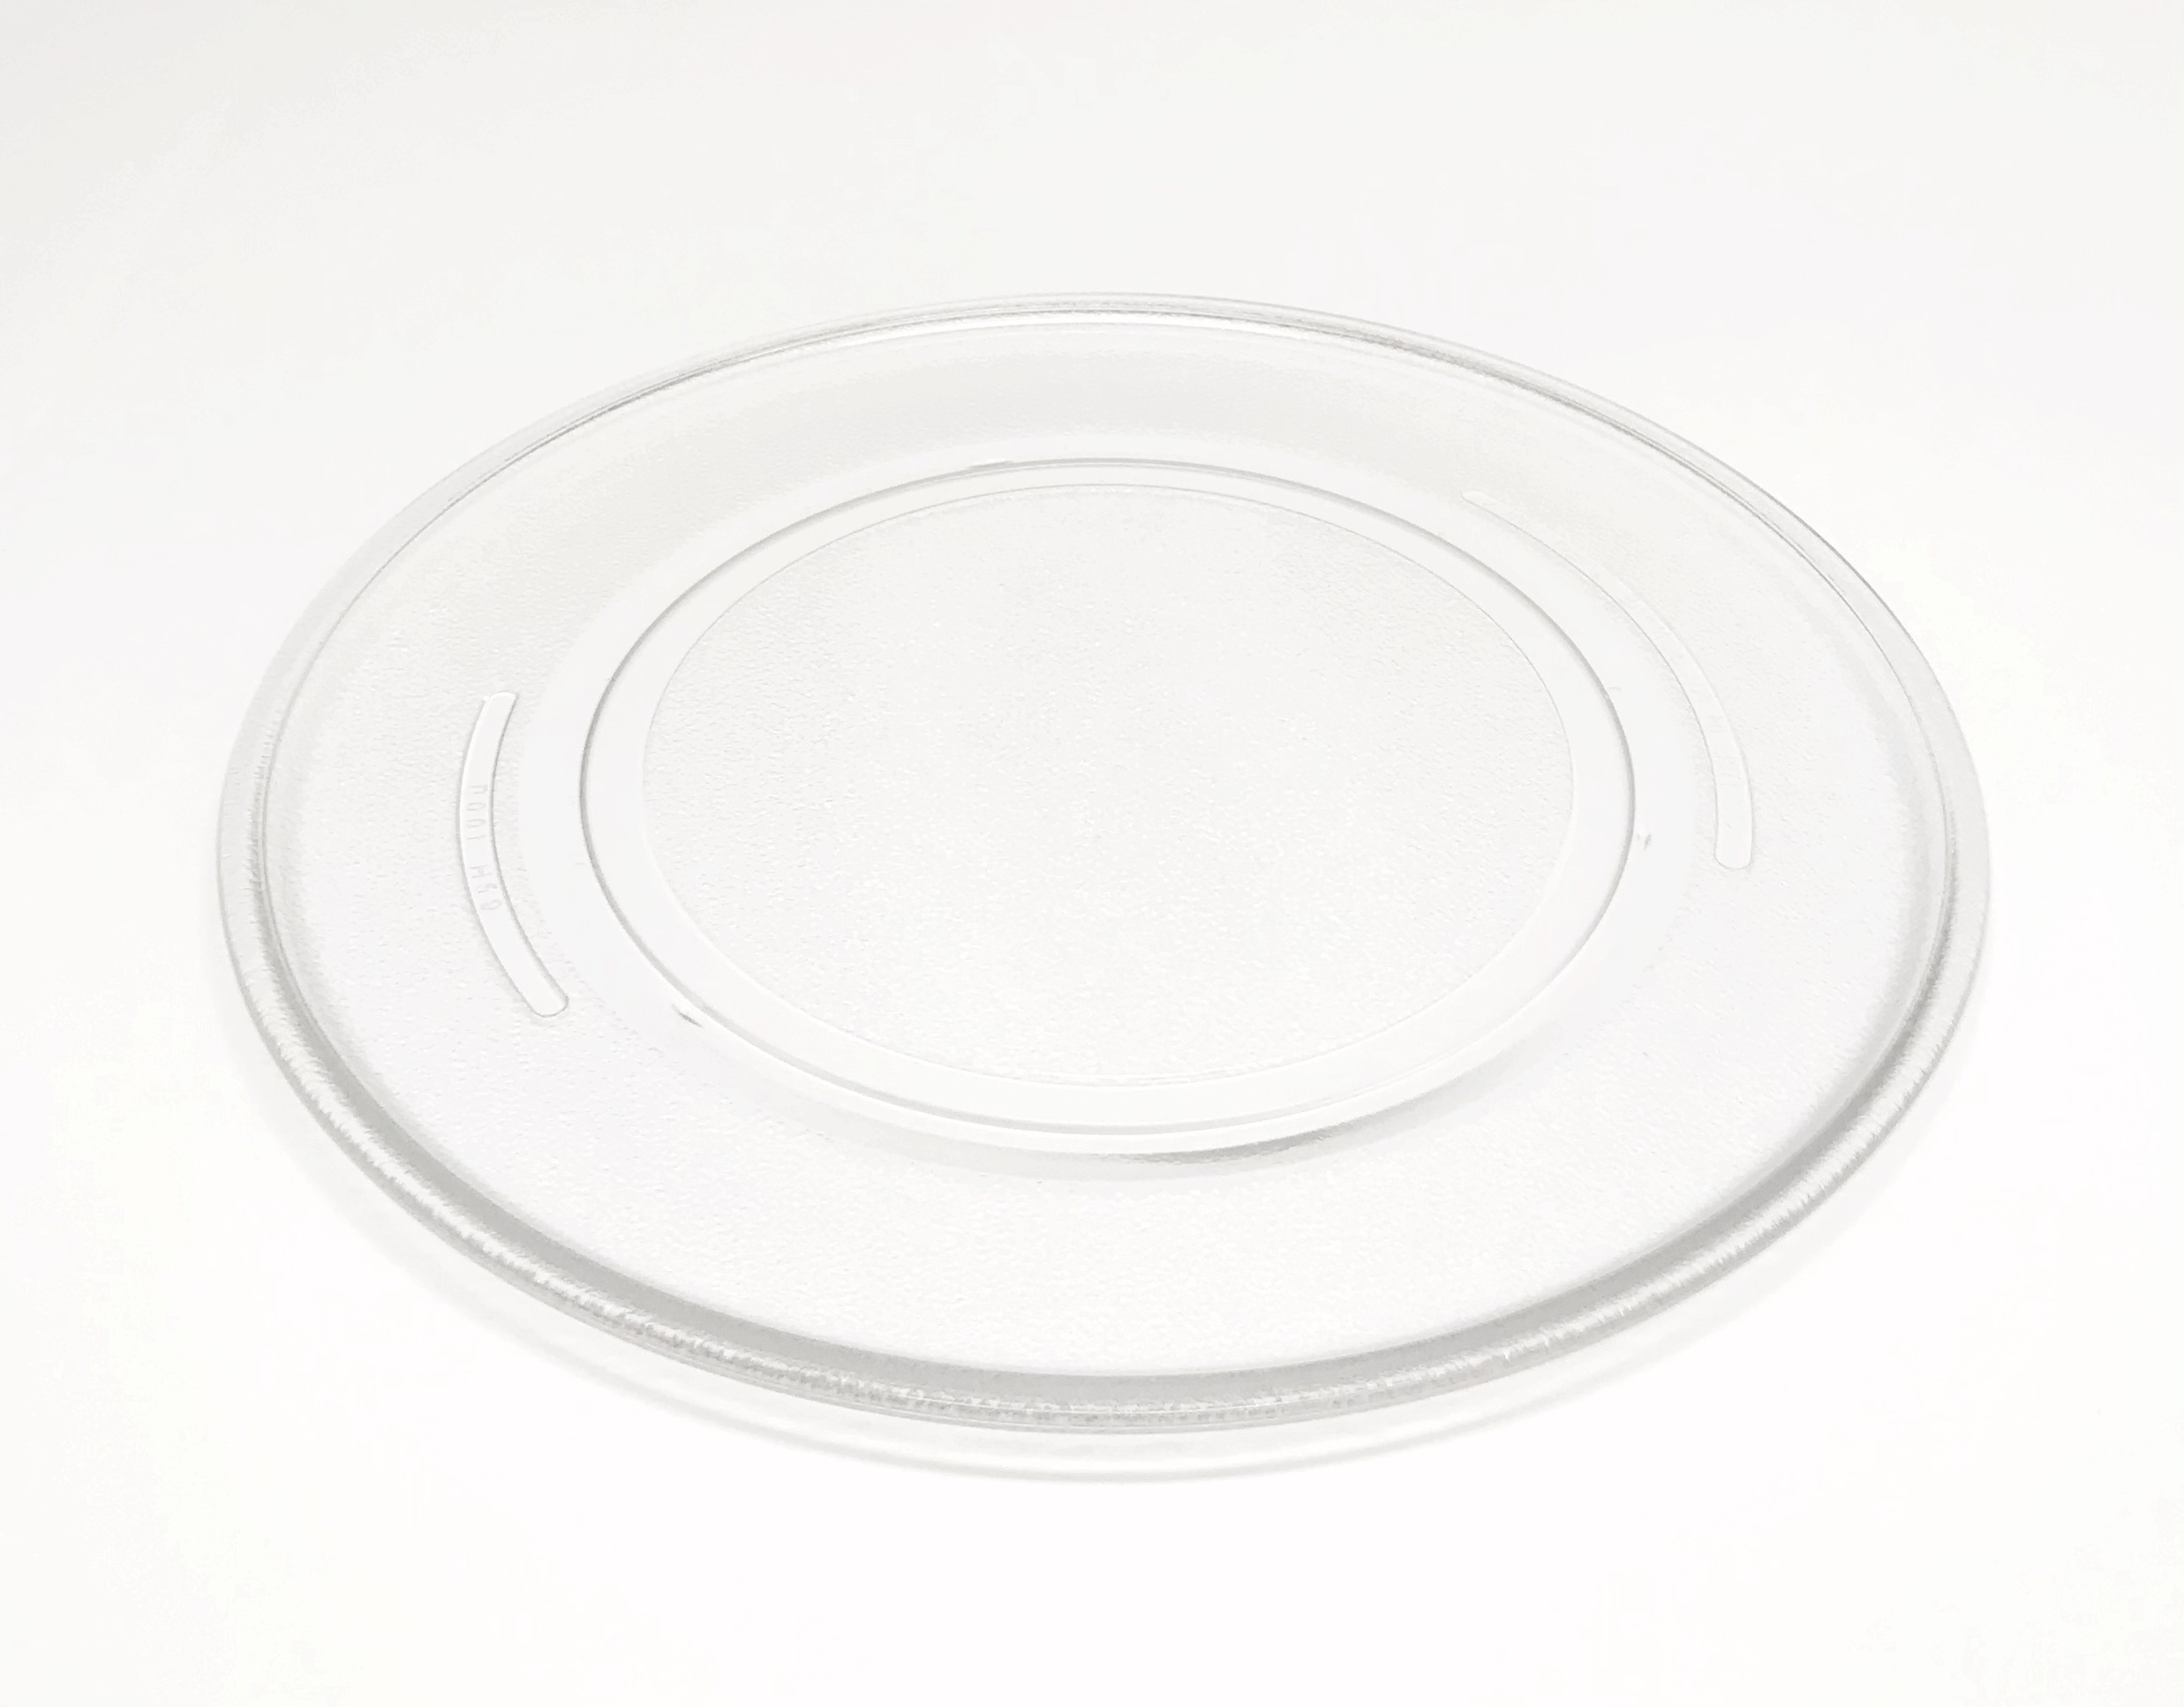 Sharp OEM Sharp Microwave Turntable Glass Tray Plate Shipped With R510BK, R-510BK